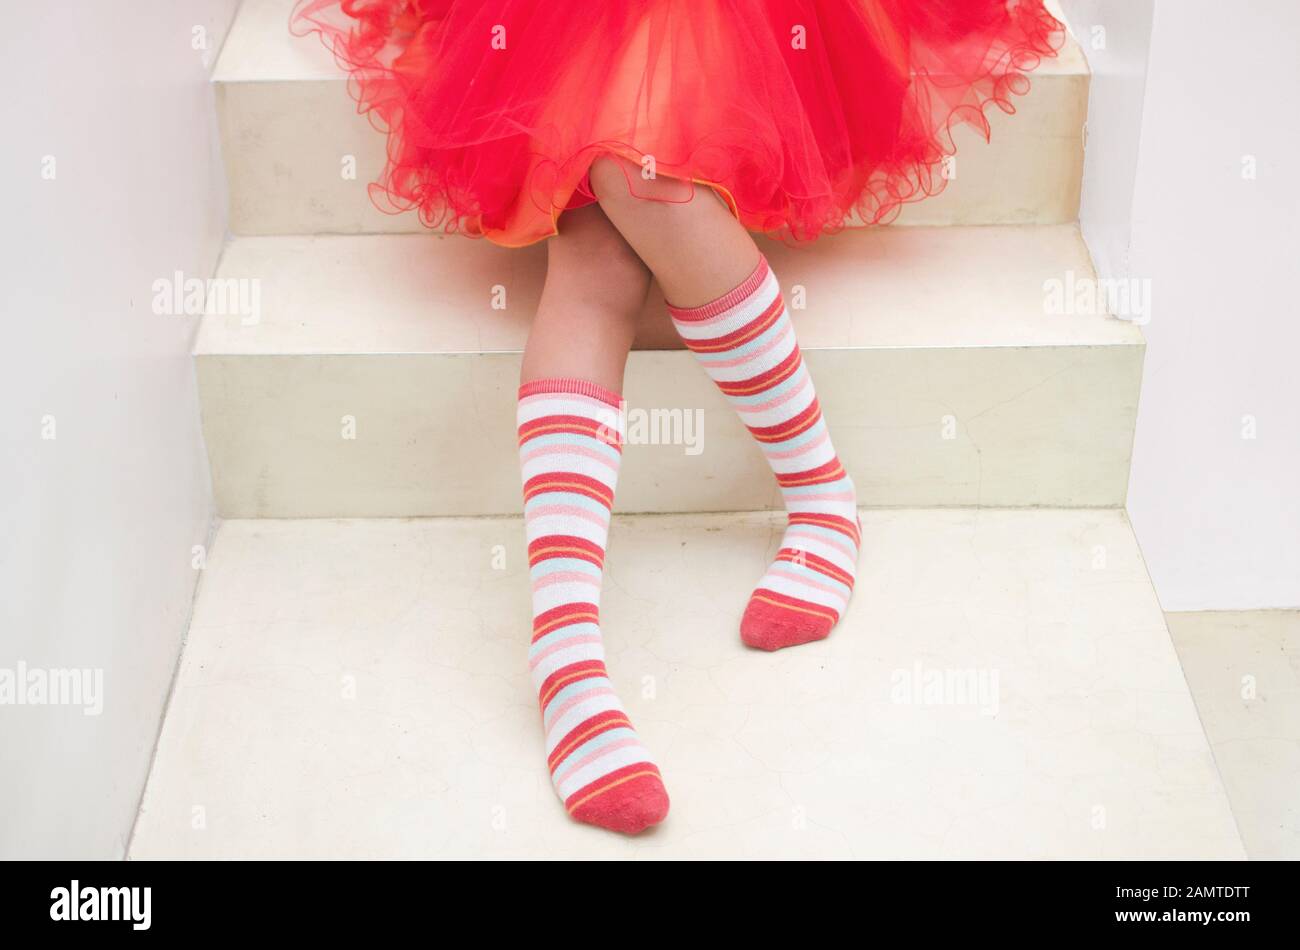 Teenage girl wearing striped socks sitting on a staircase Stock Photo